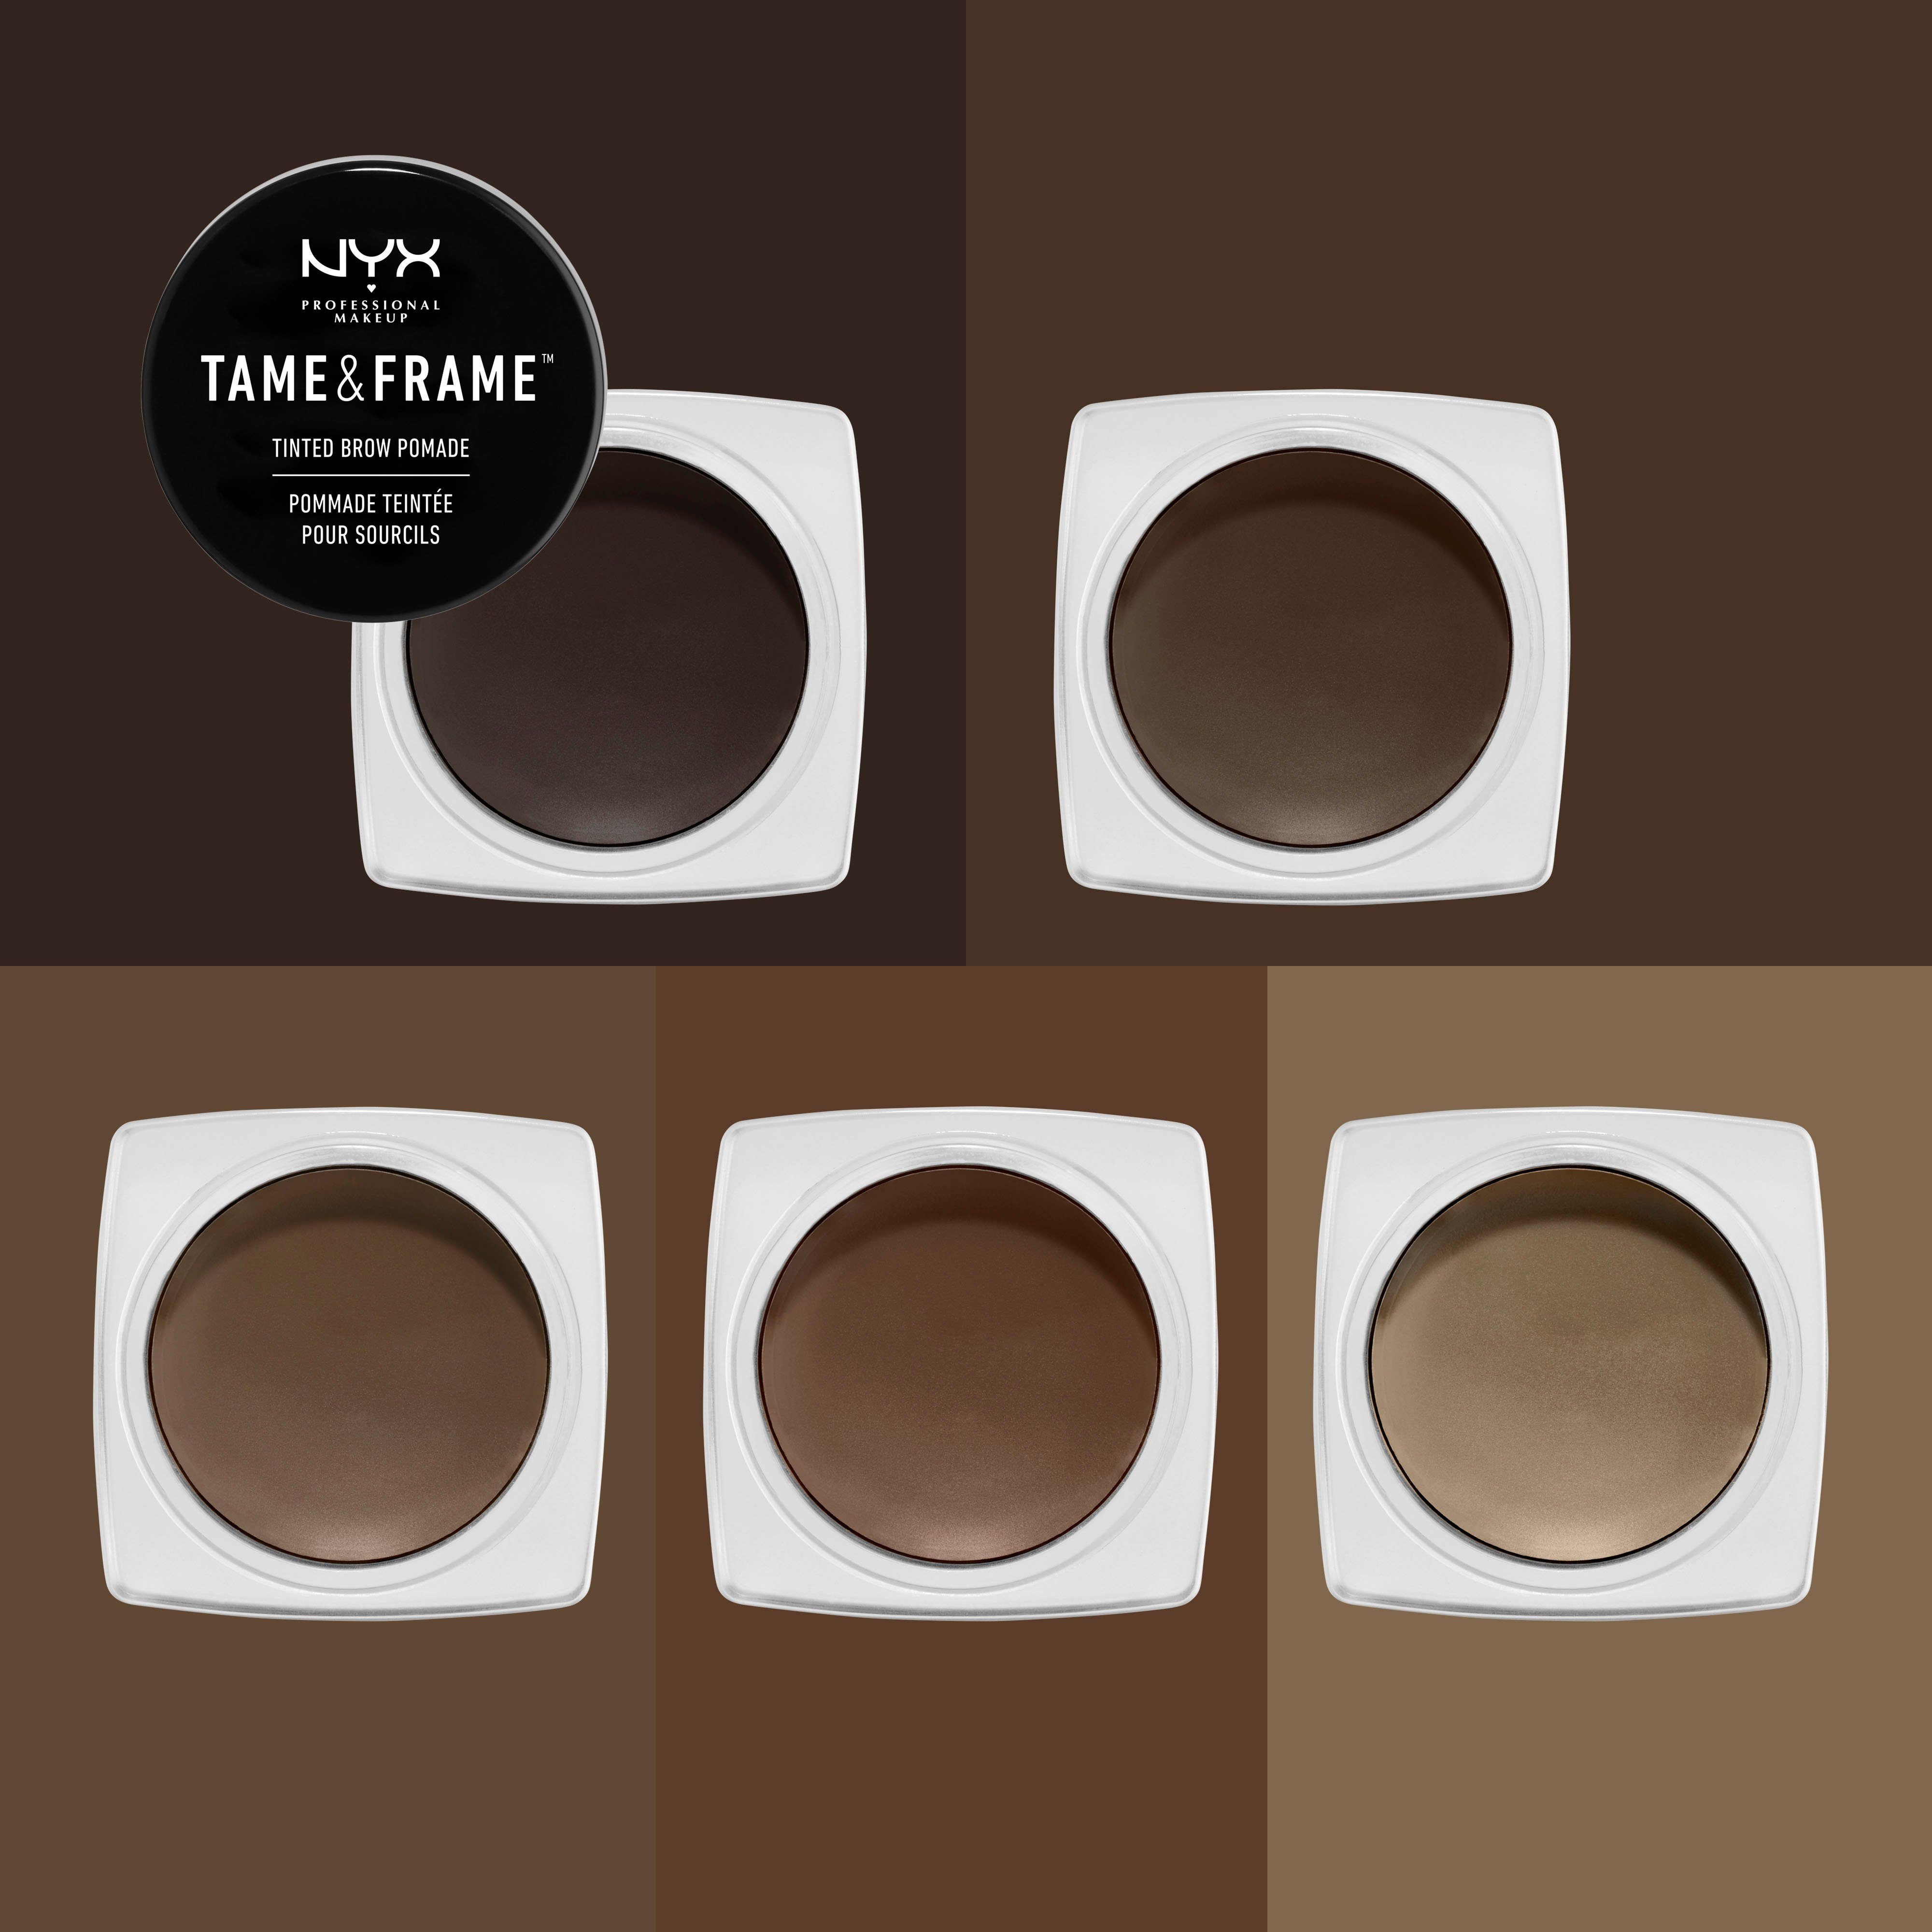 Makeup Professional brunette and Brow Frame NYX Tame Augenbrauen-Gel Pomade